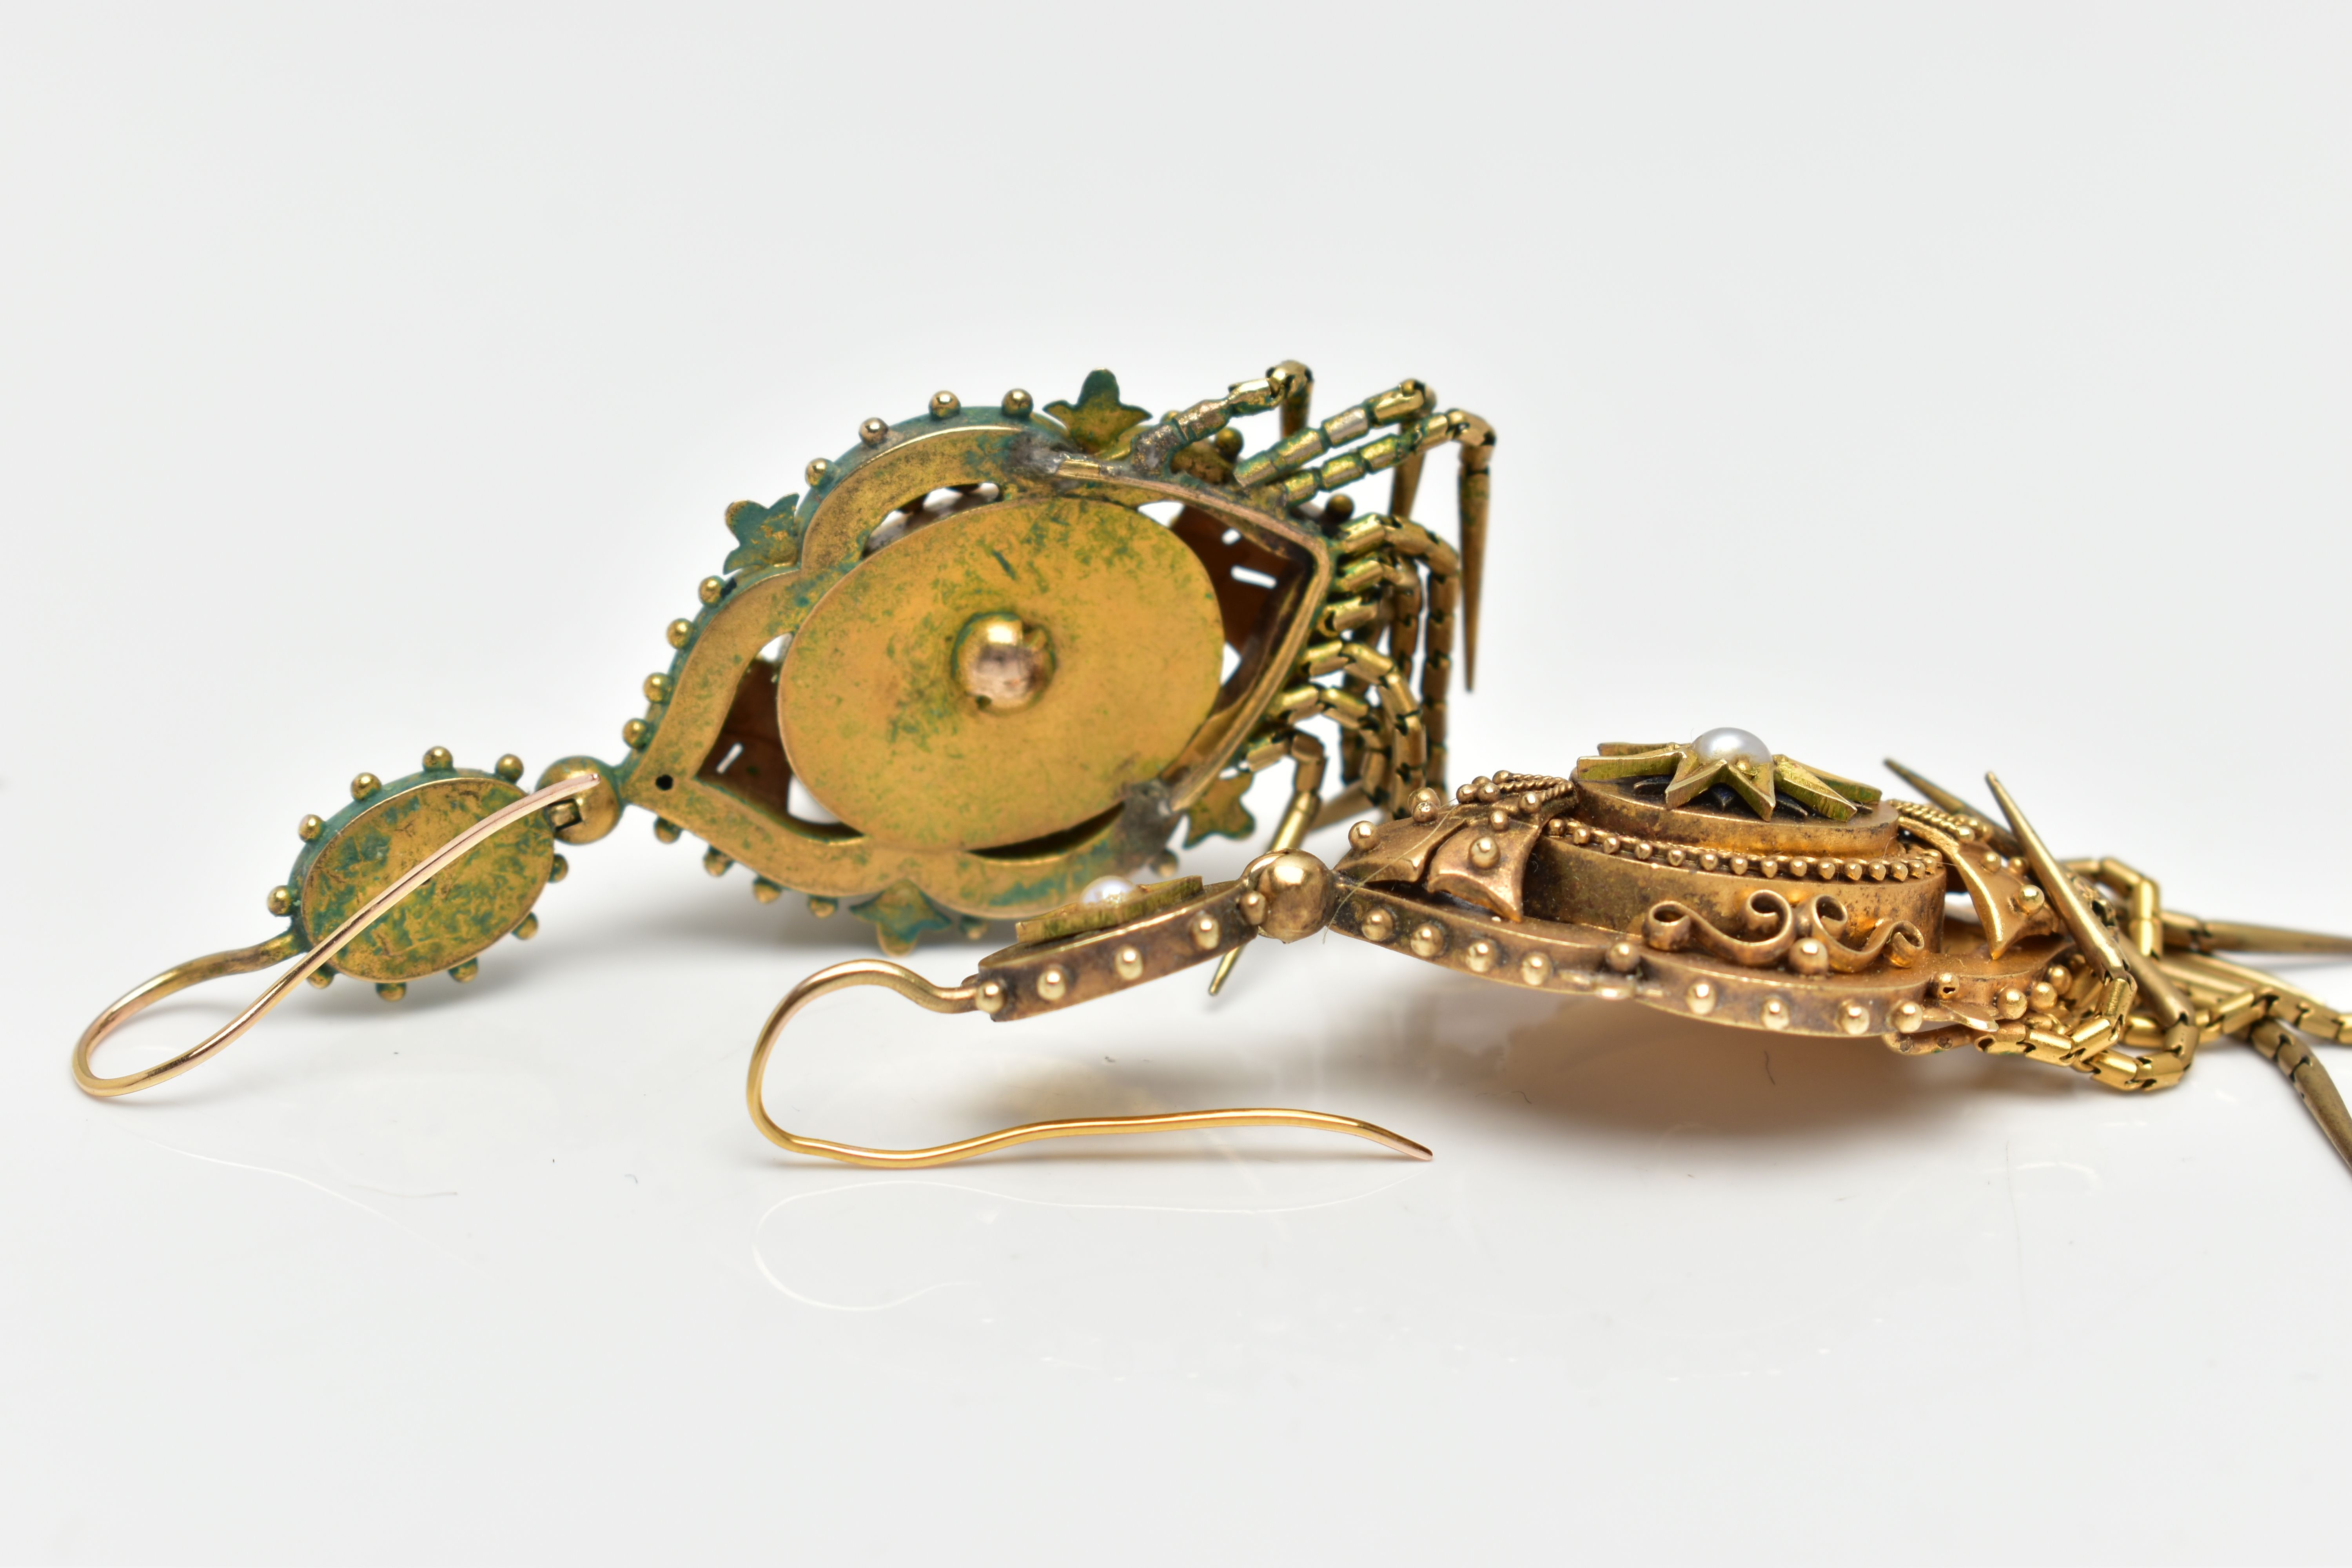 A PAIR OF MID 19TH CENTURY ETRUSCAN STYLE EARRINGS, yellow metal Victorian drop earrings, fish - Image 4 of 4